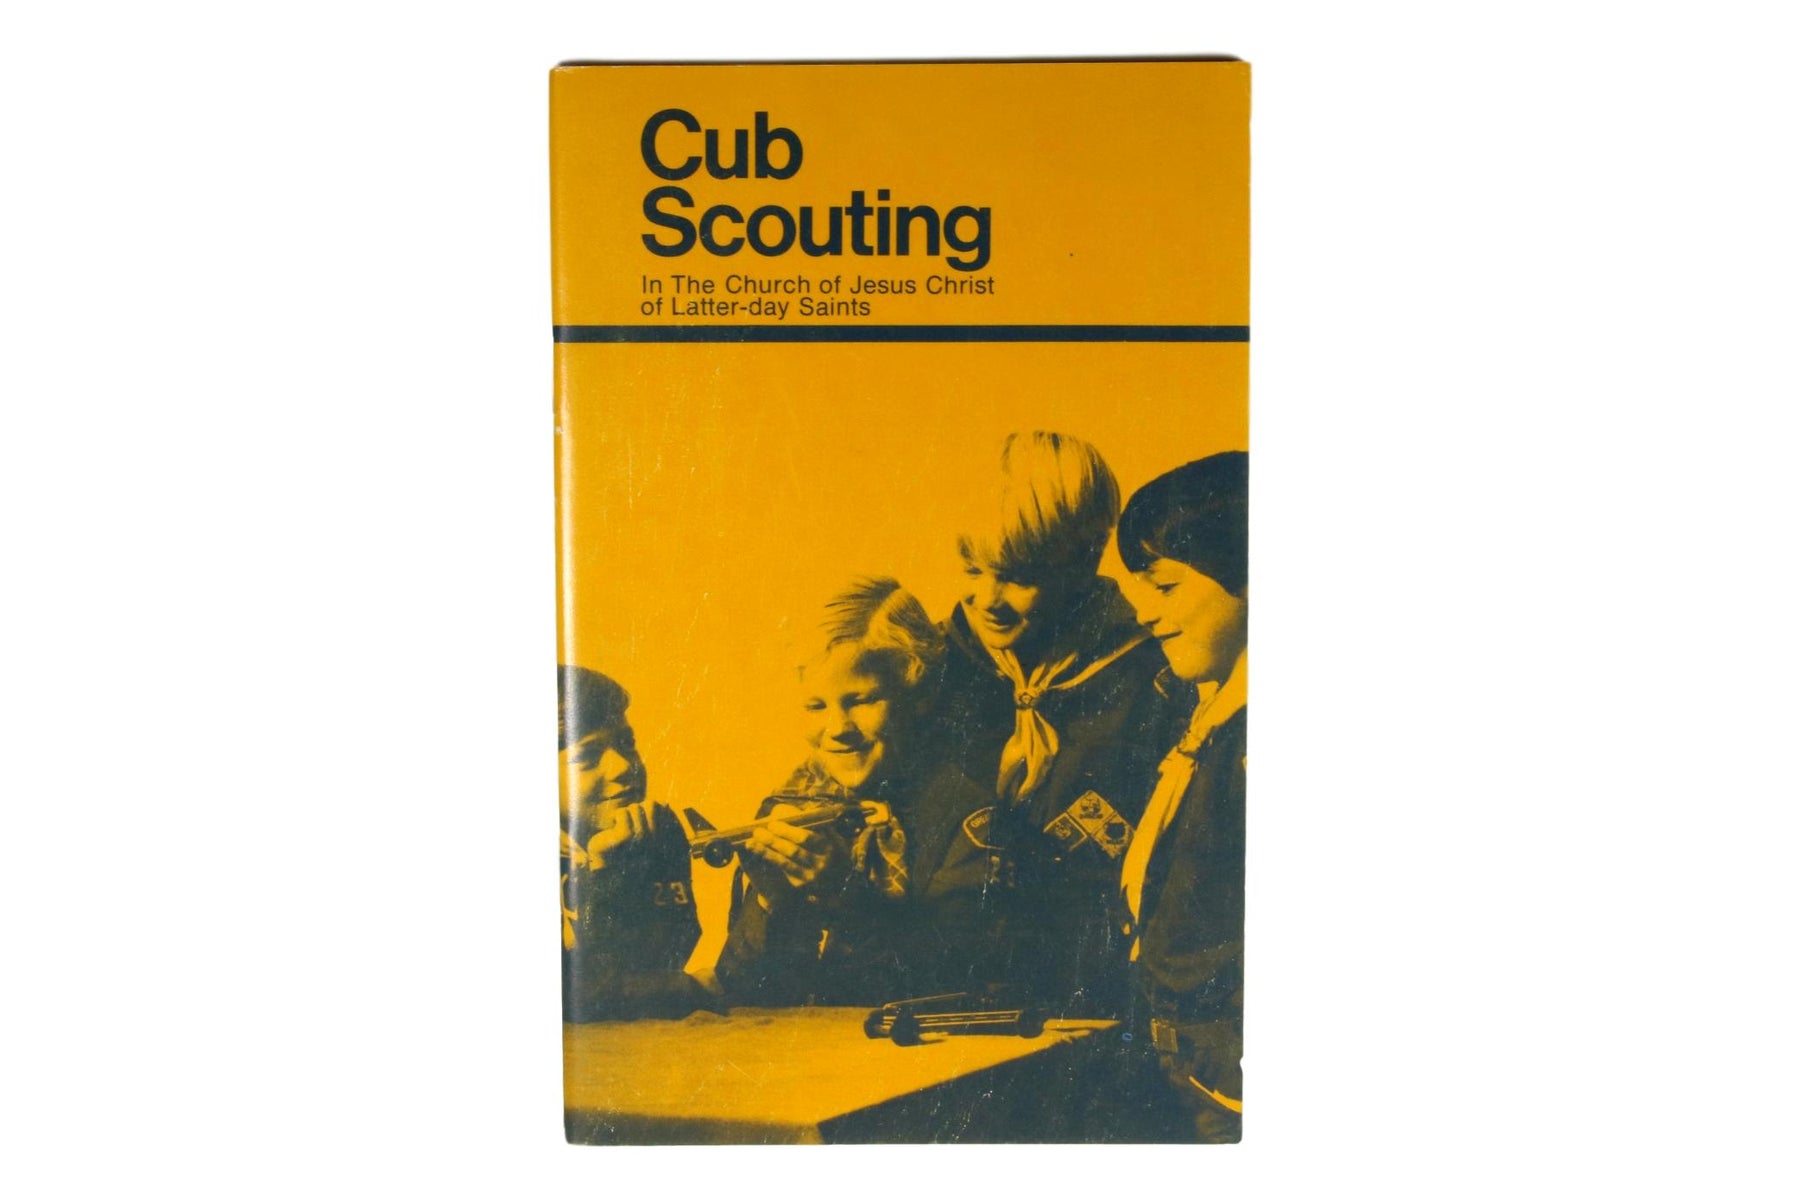 Cub Scouting in the LDS Church 1974